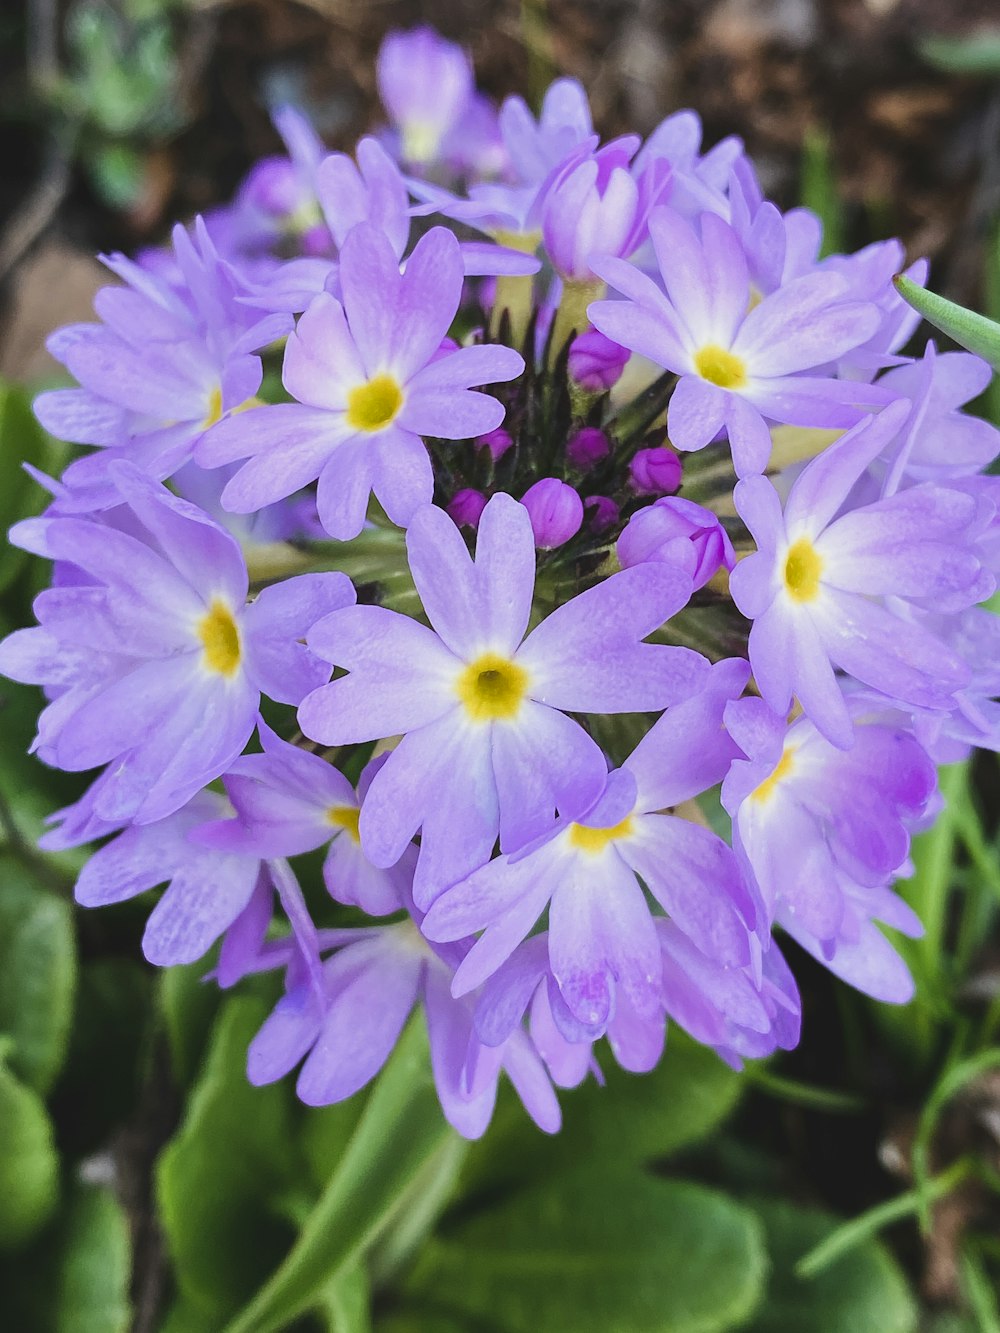 a bunch of purple flowers with green leaves